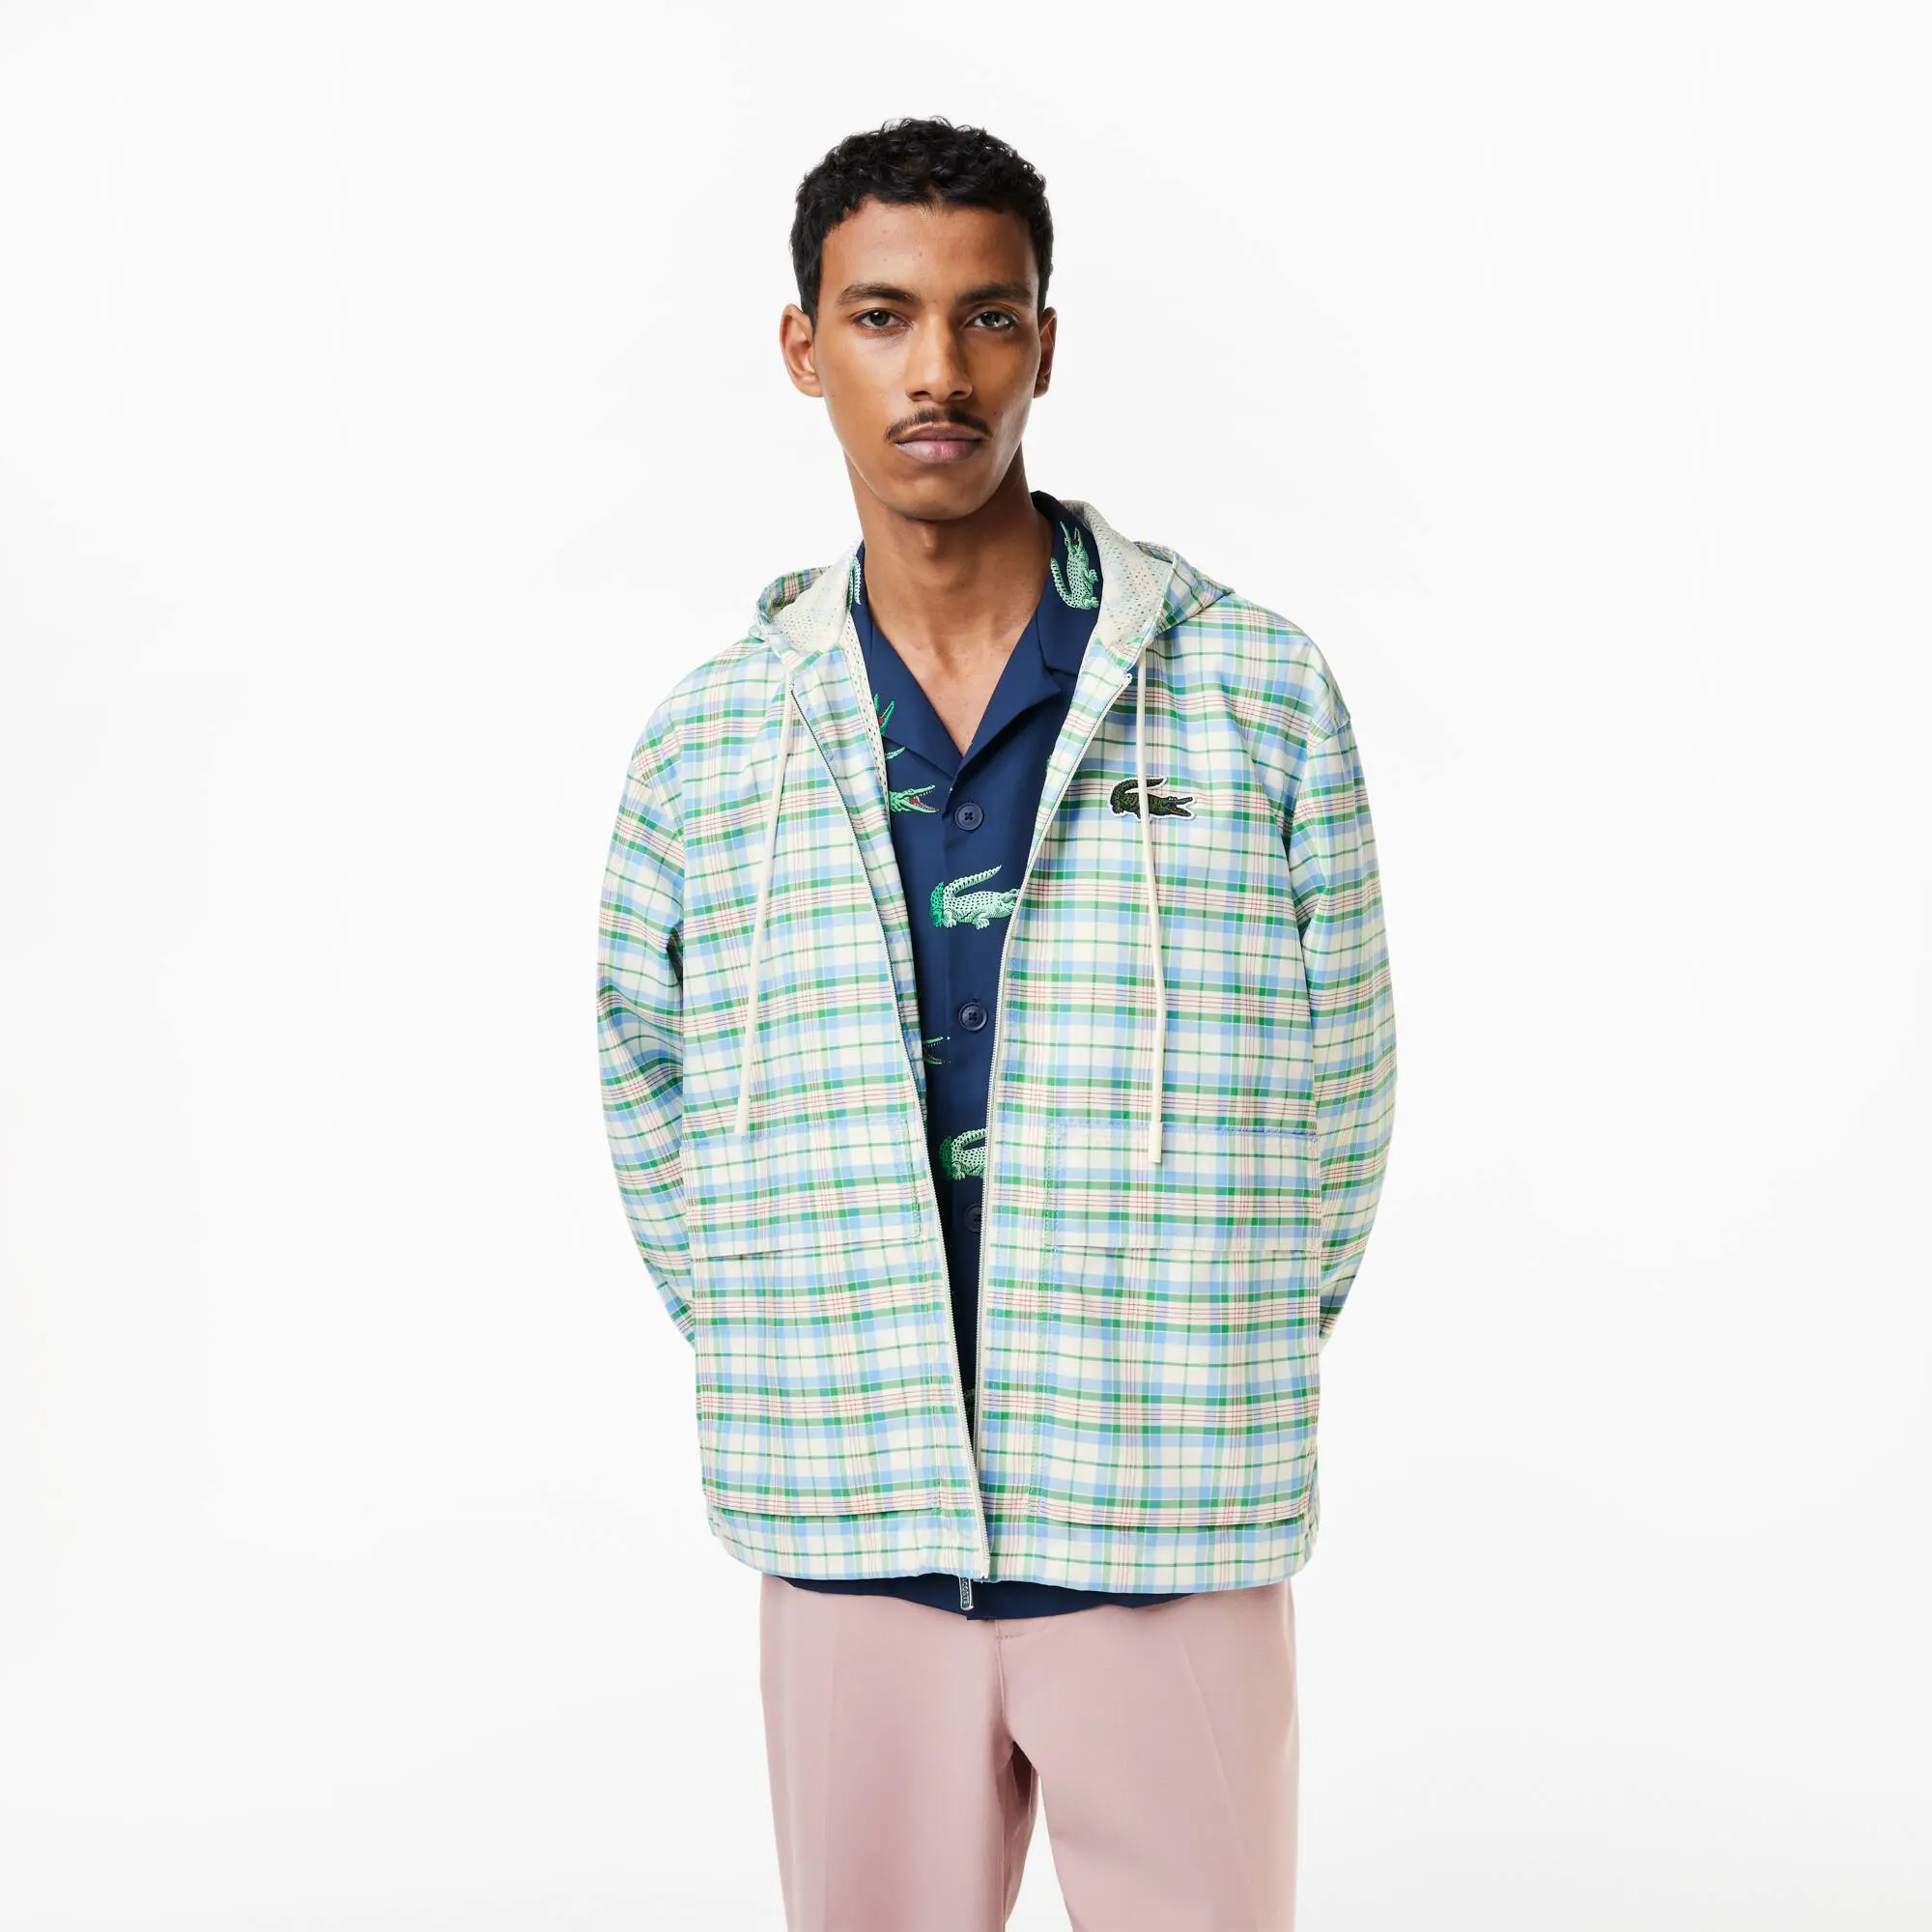 Lacoste Men’s Checked Jacket. 1